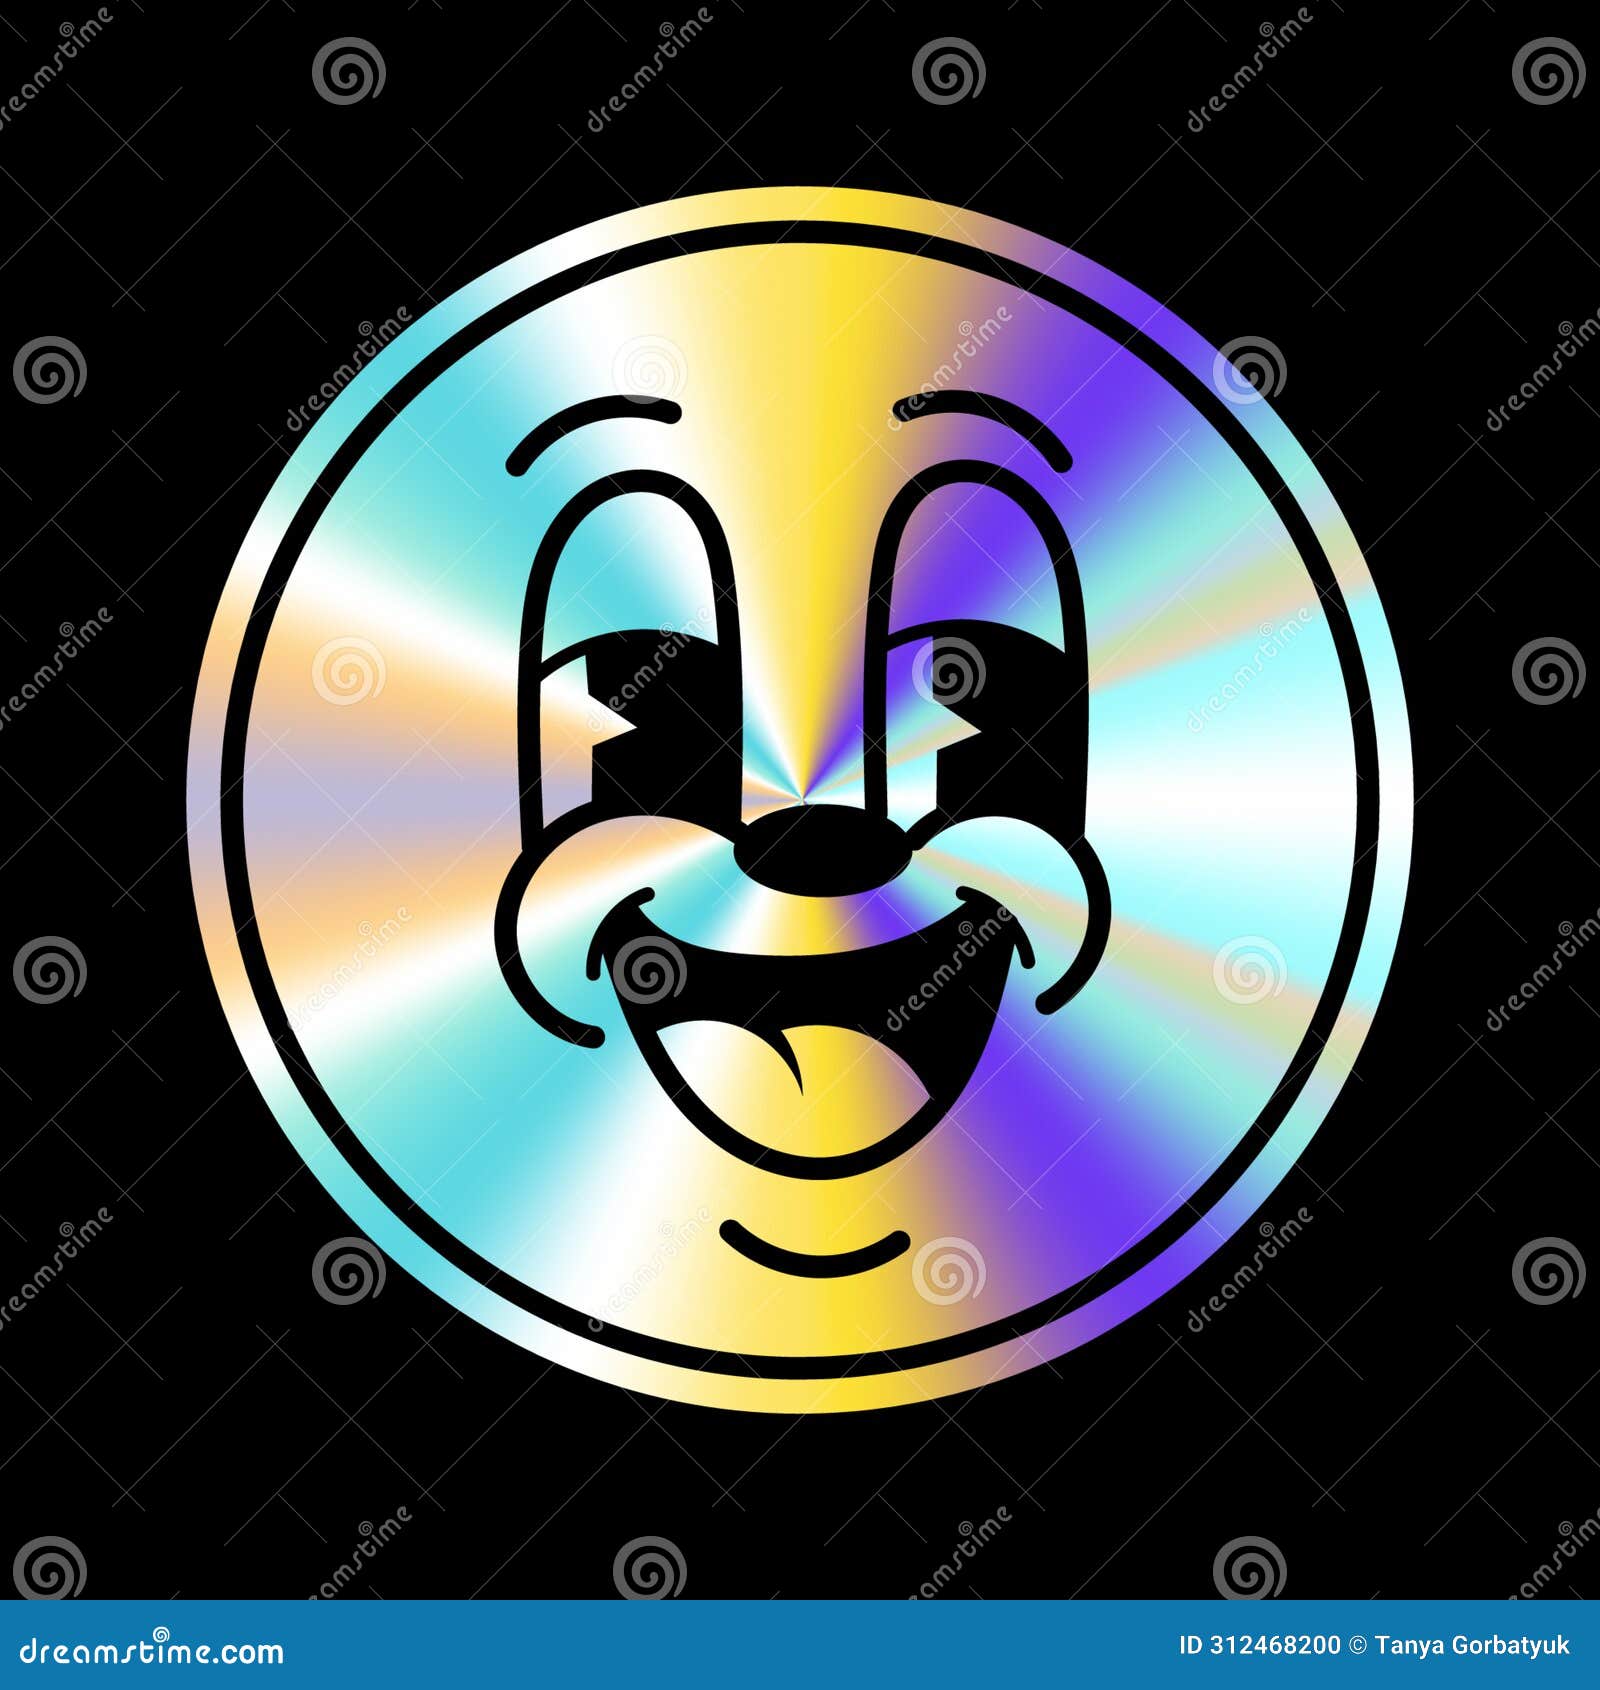 holographic sticker with cartoon face